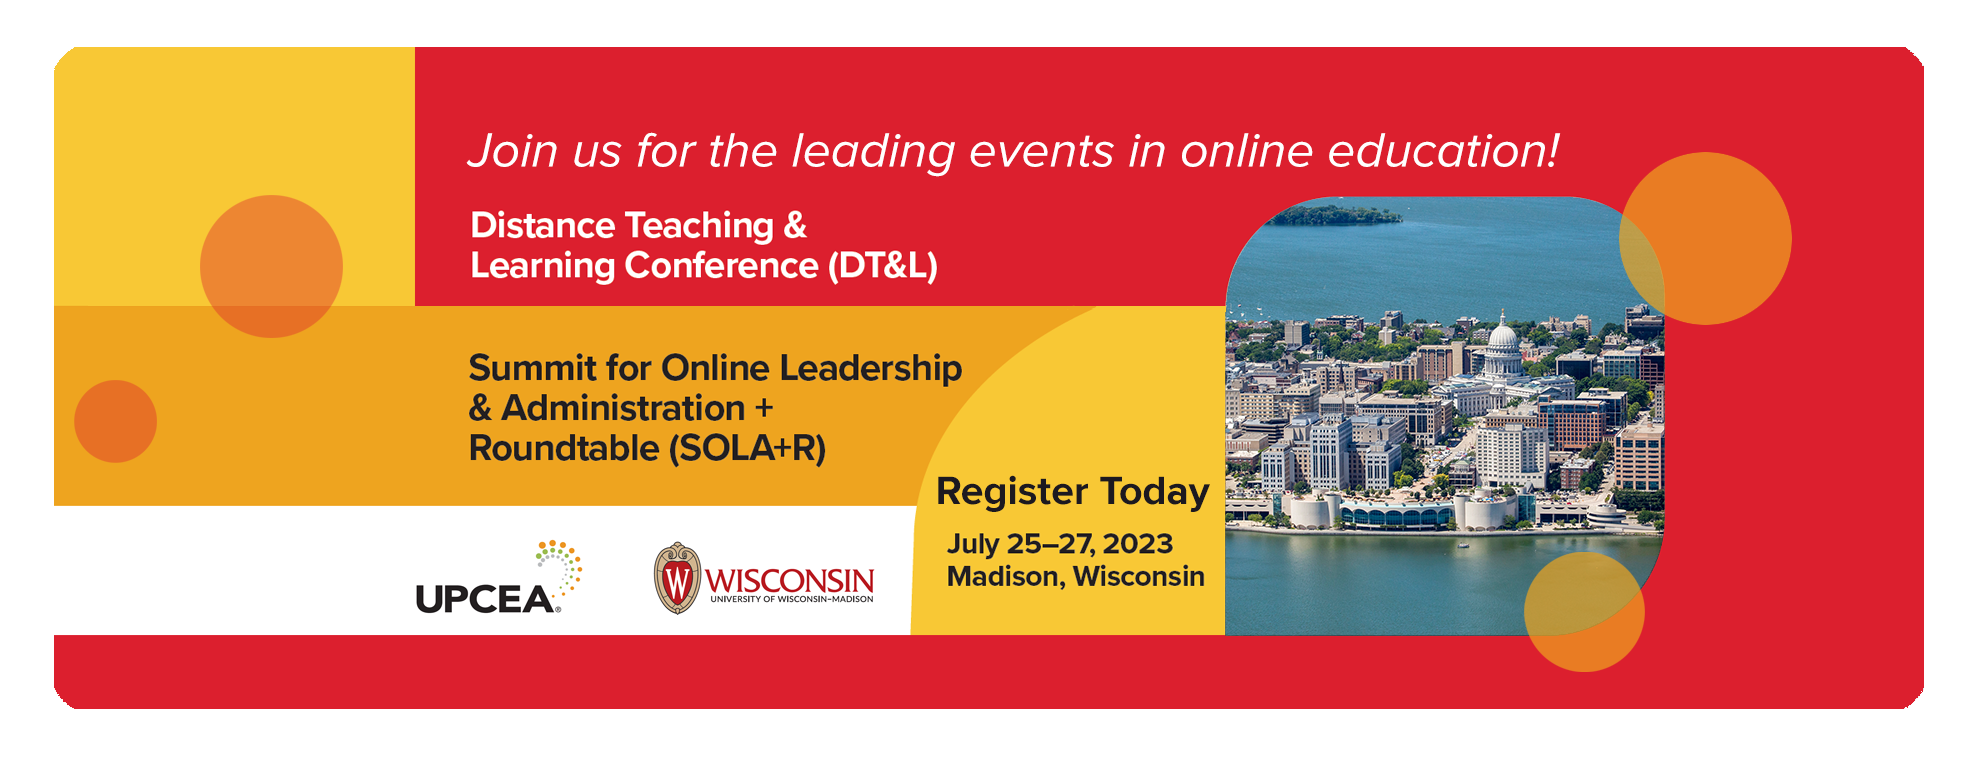 2023 Distance Teaching & Learning (DT&L) and Summit for Online Leadership and Administration + Roundtable (SOLA+R) | July 25-27, 2023 | Madison, WI